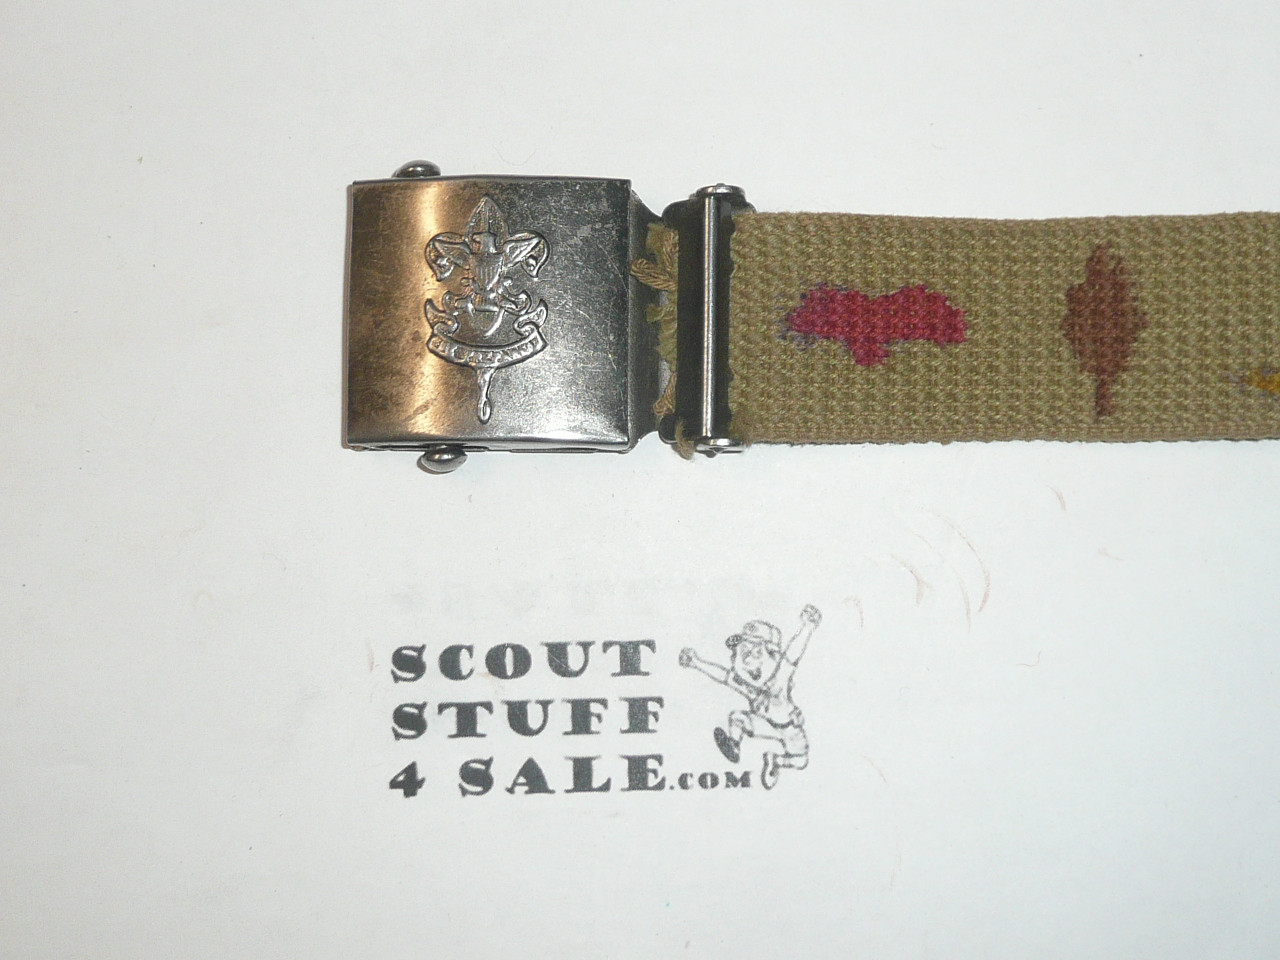 1950's Boy Scout Friction Belt and Buckle, camp achievements on webbed belt